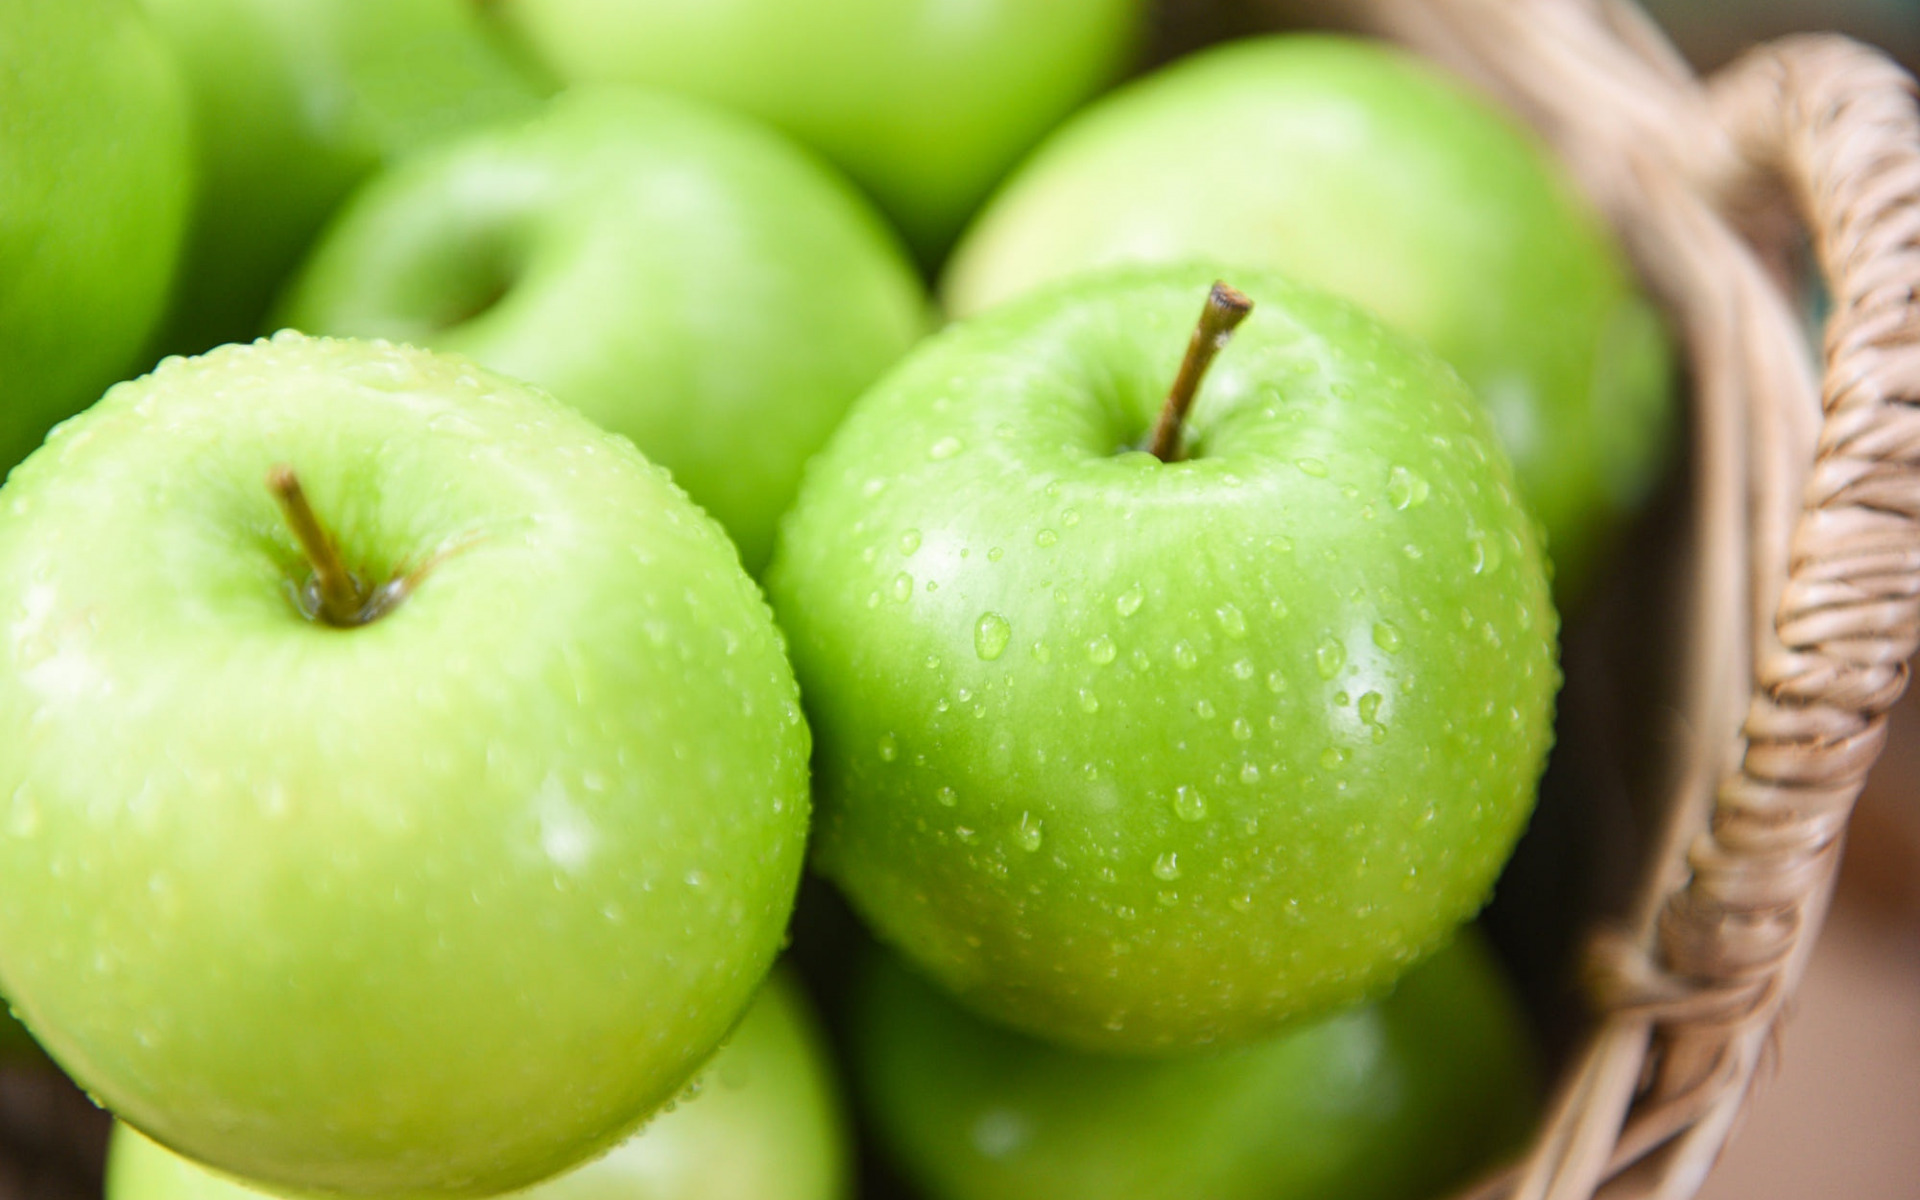 Green Apples, Fruits, Basket With Apples, Background - Apples Background - HD Wallpaper 